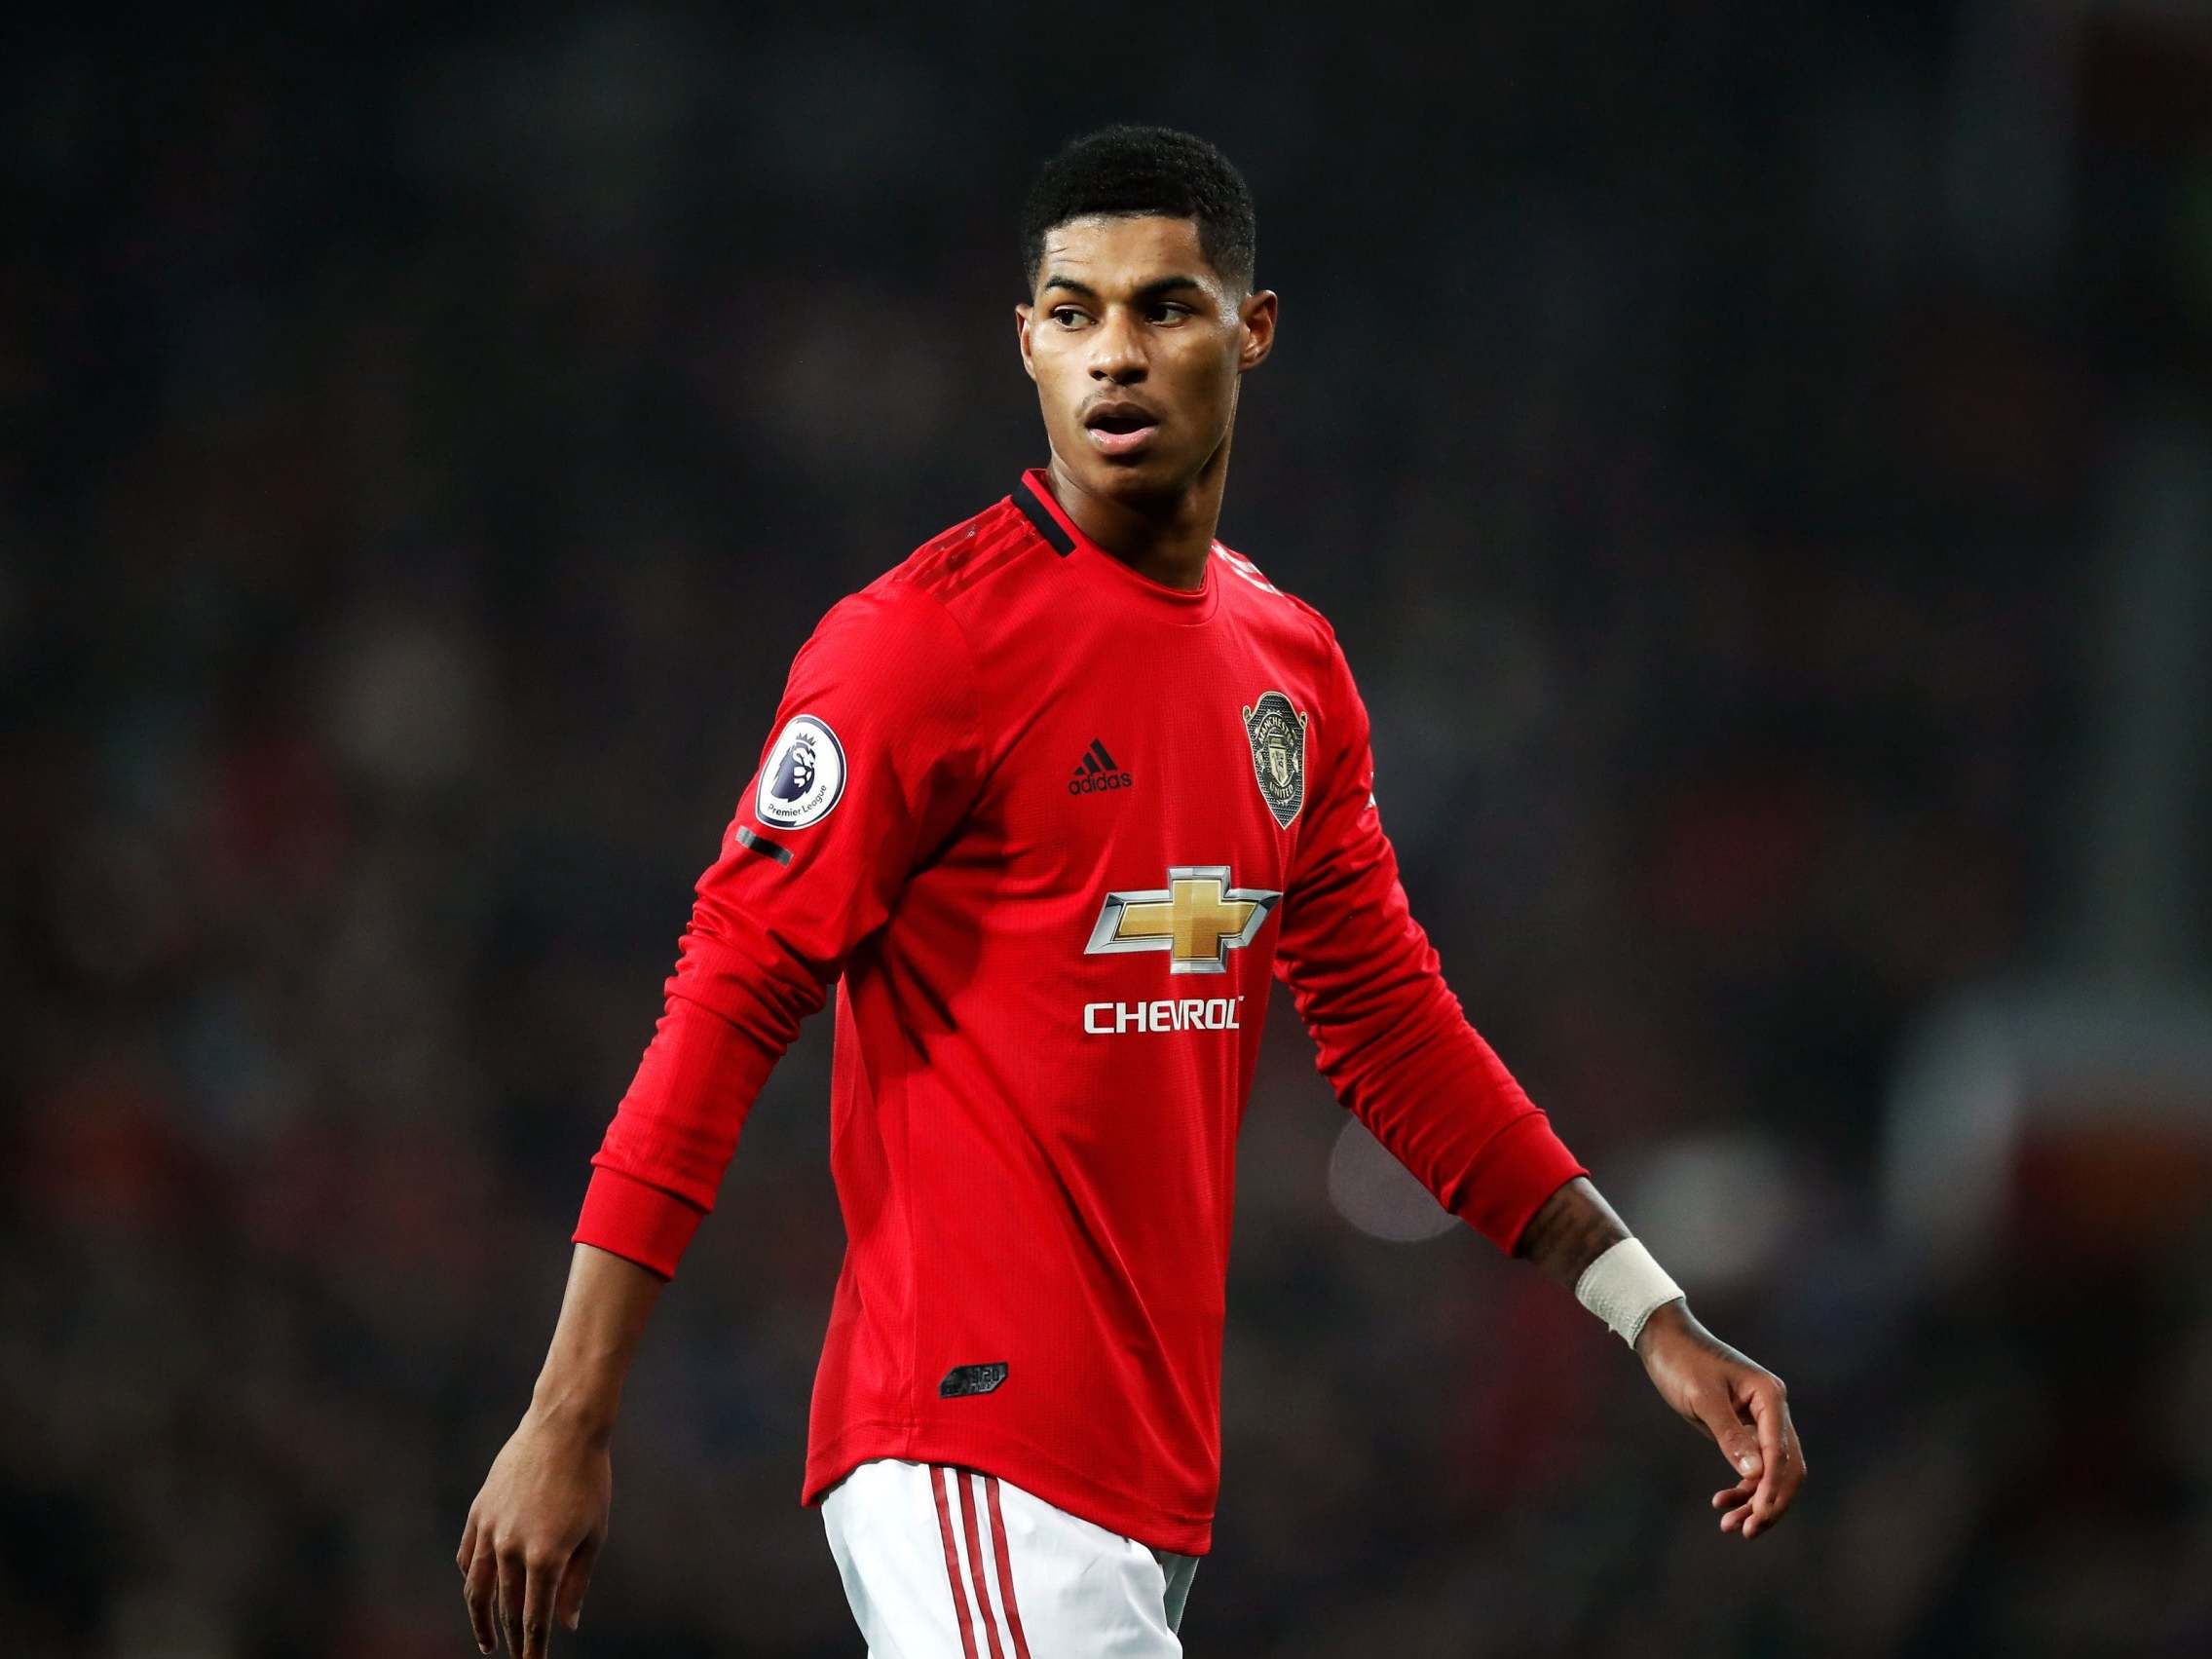 Marcus Rashford recently received a award for his altruism